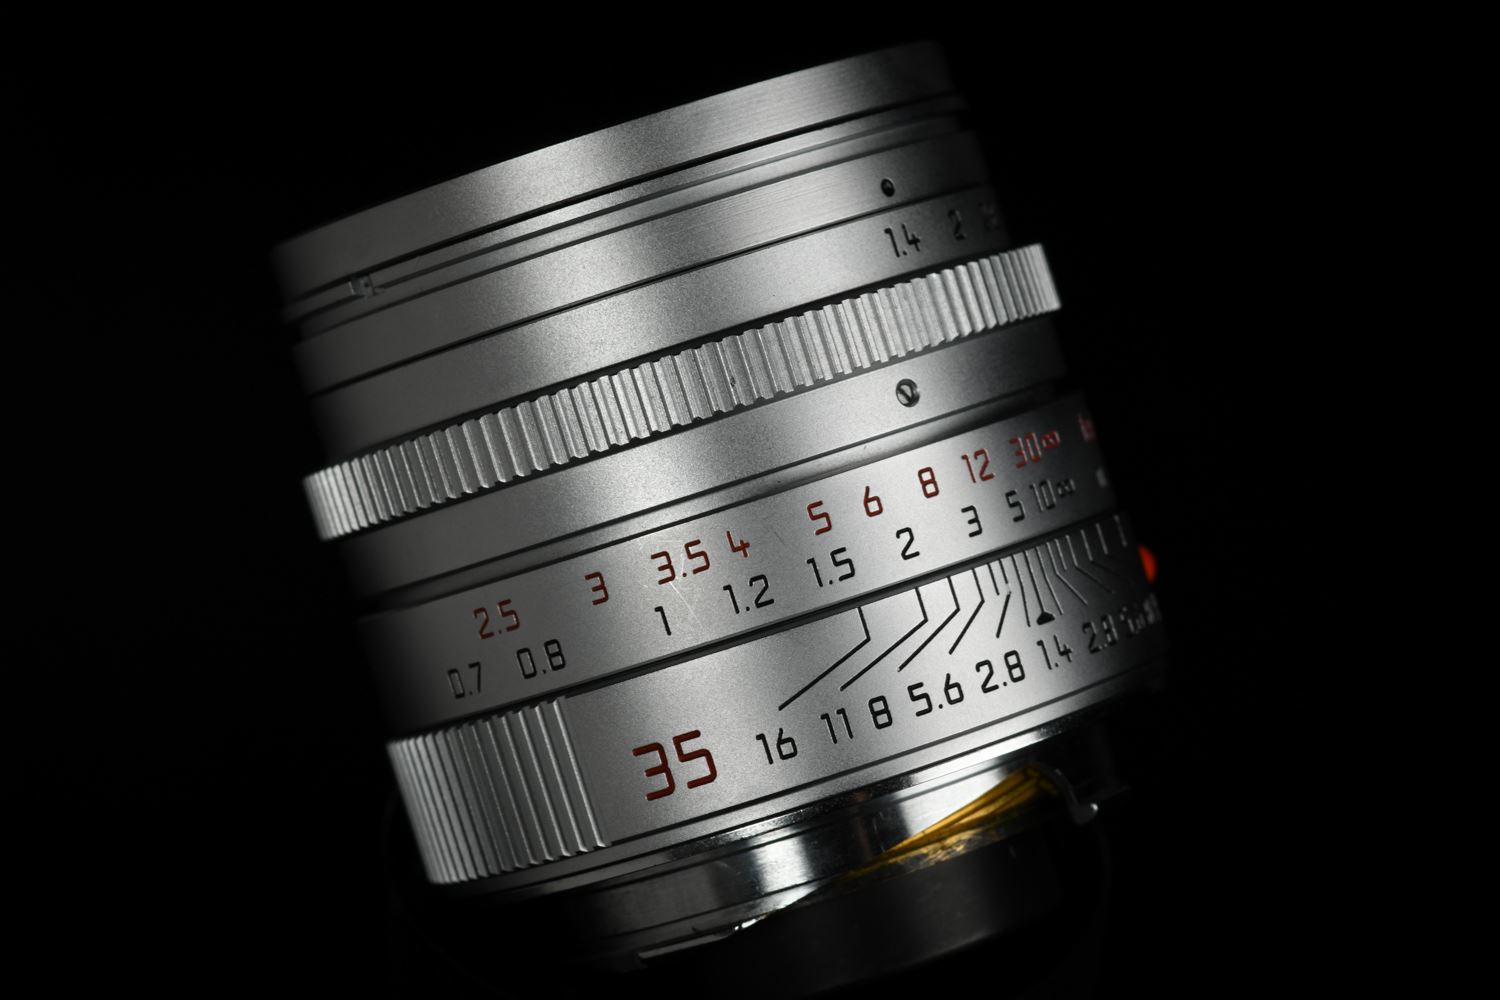 Picture of Leica Summilux-M 35mm f/1.4 ASPH Ver.1 Silver